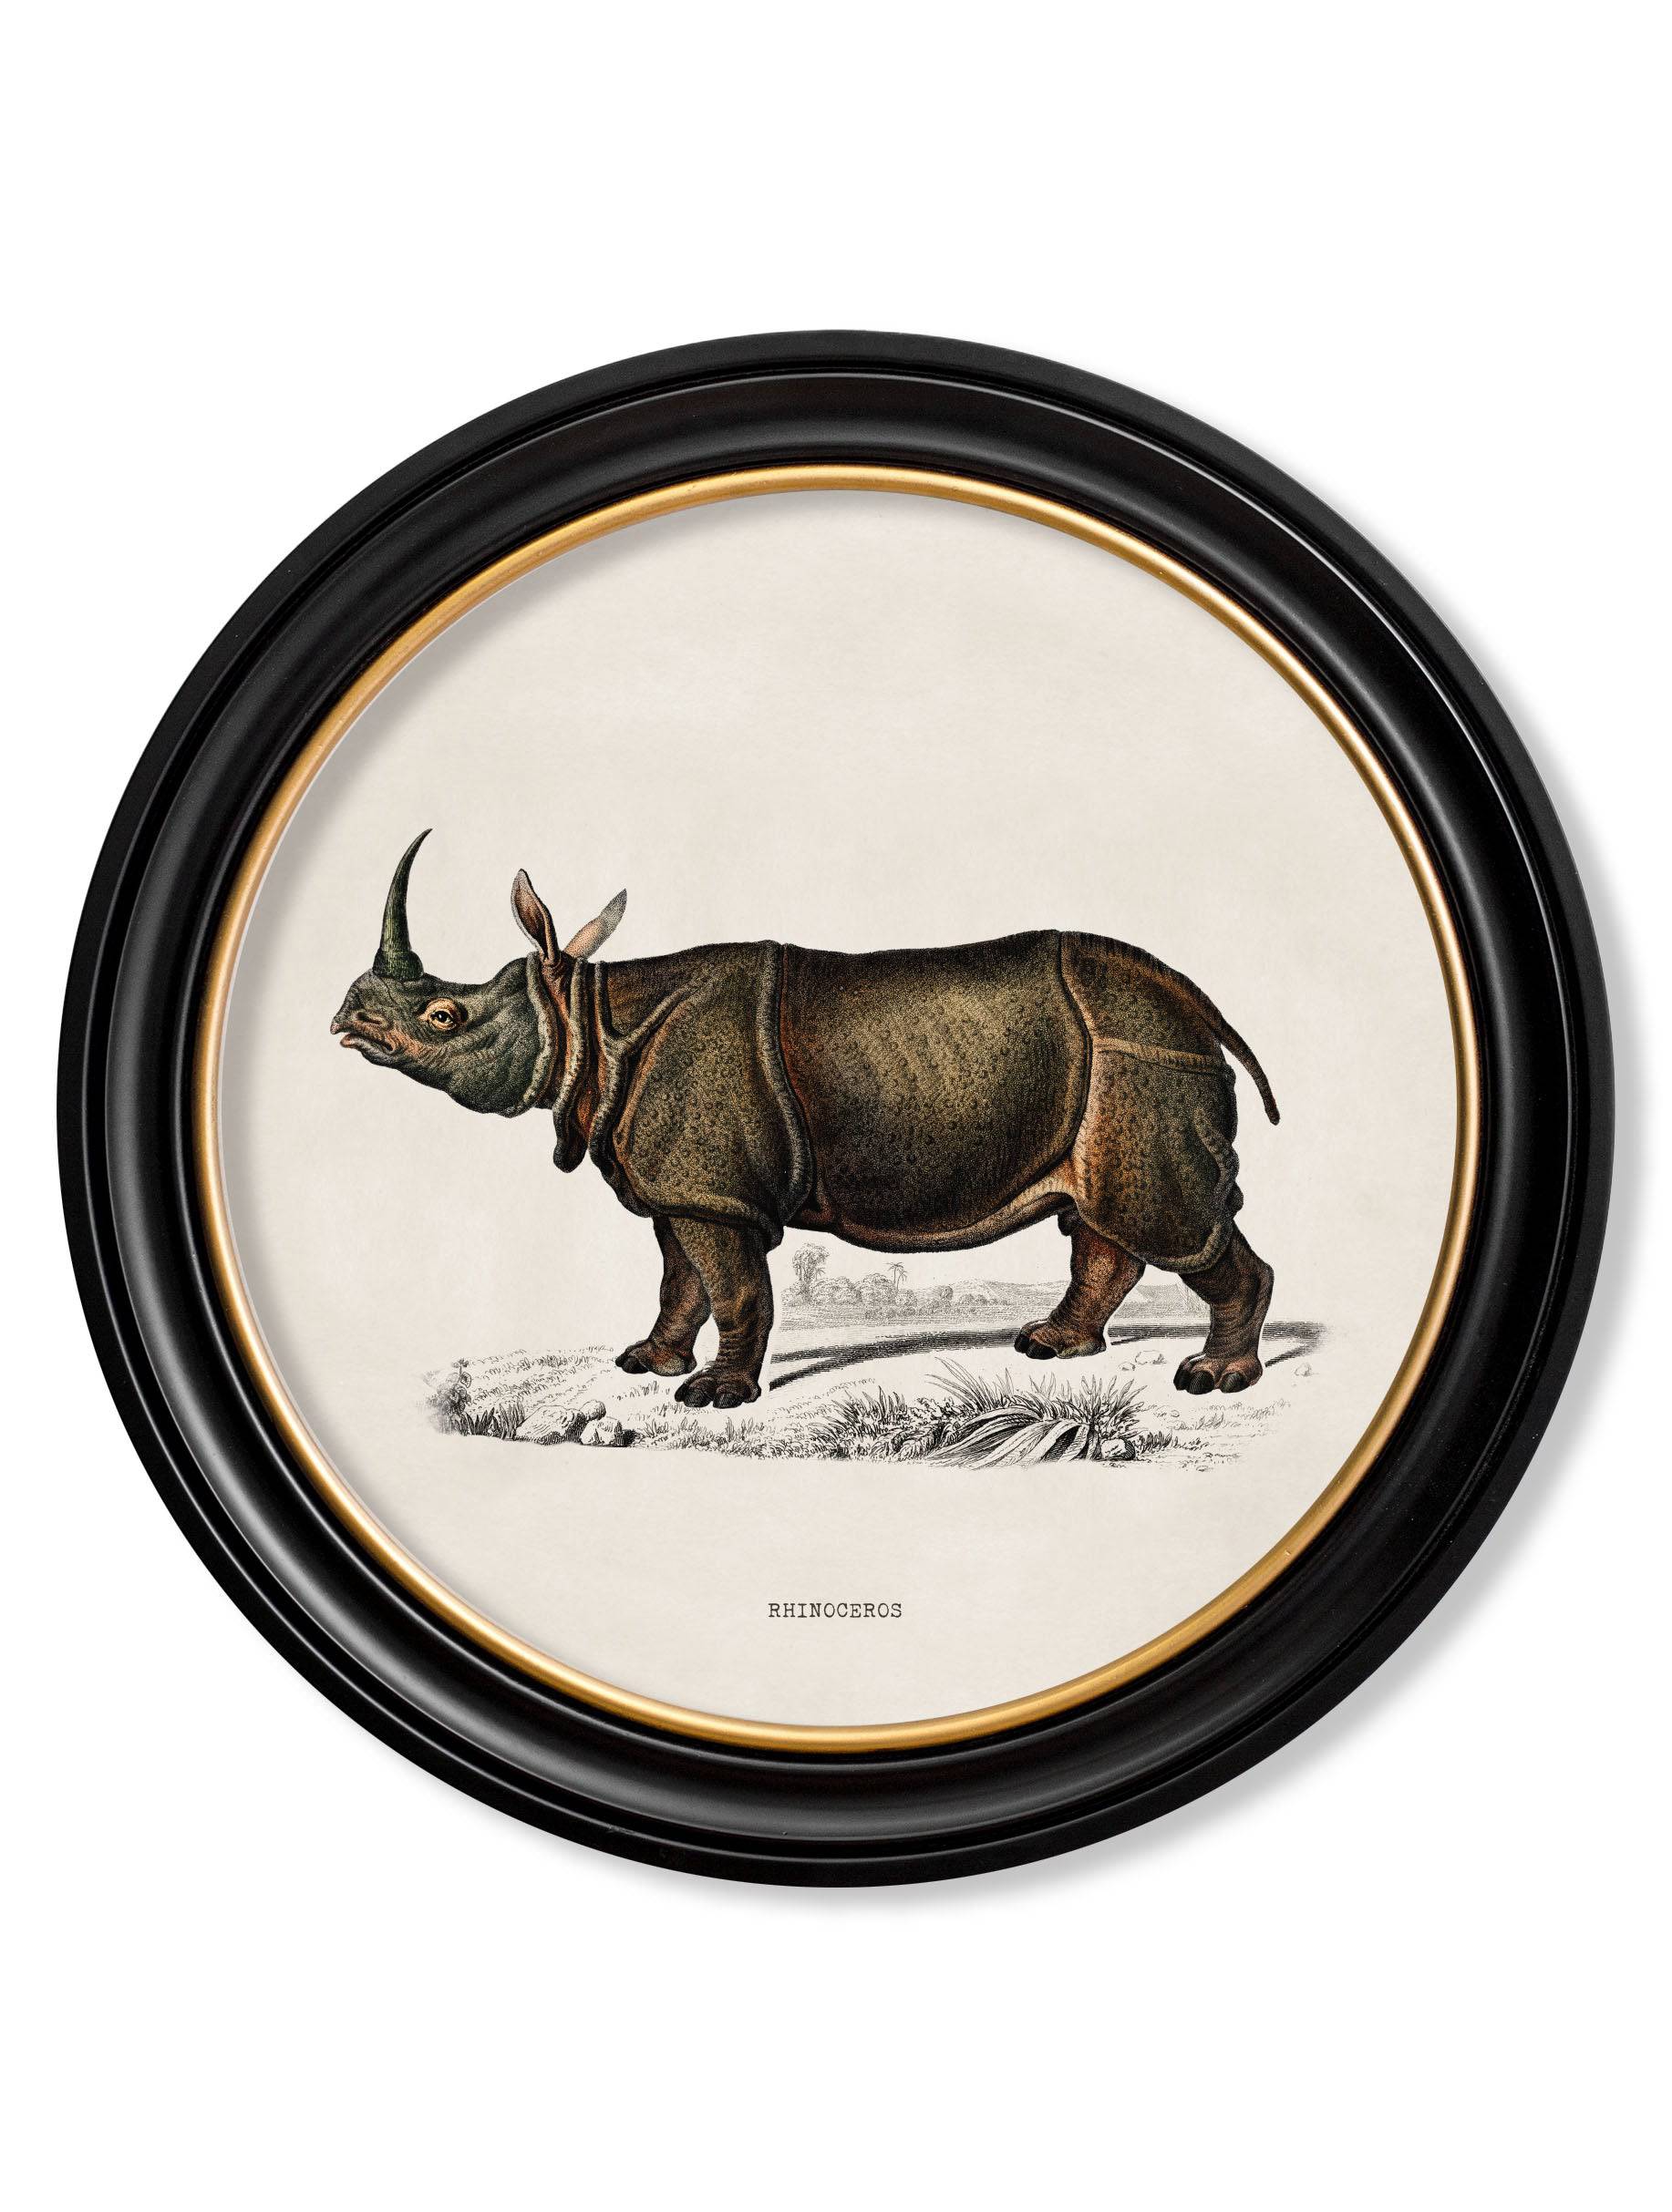 C.1846 Rhino - Round Frames for sale - Woodcock and Cavendish